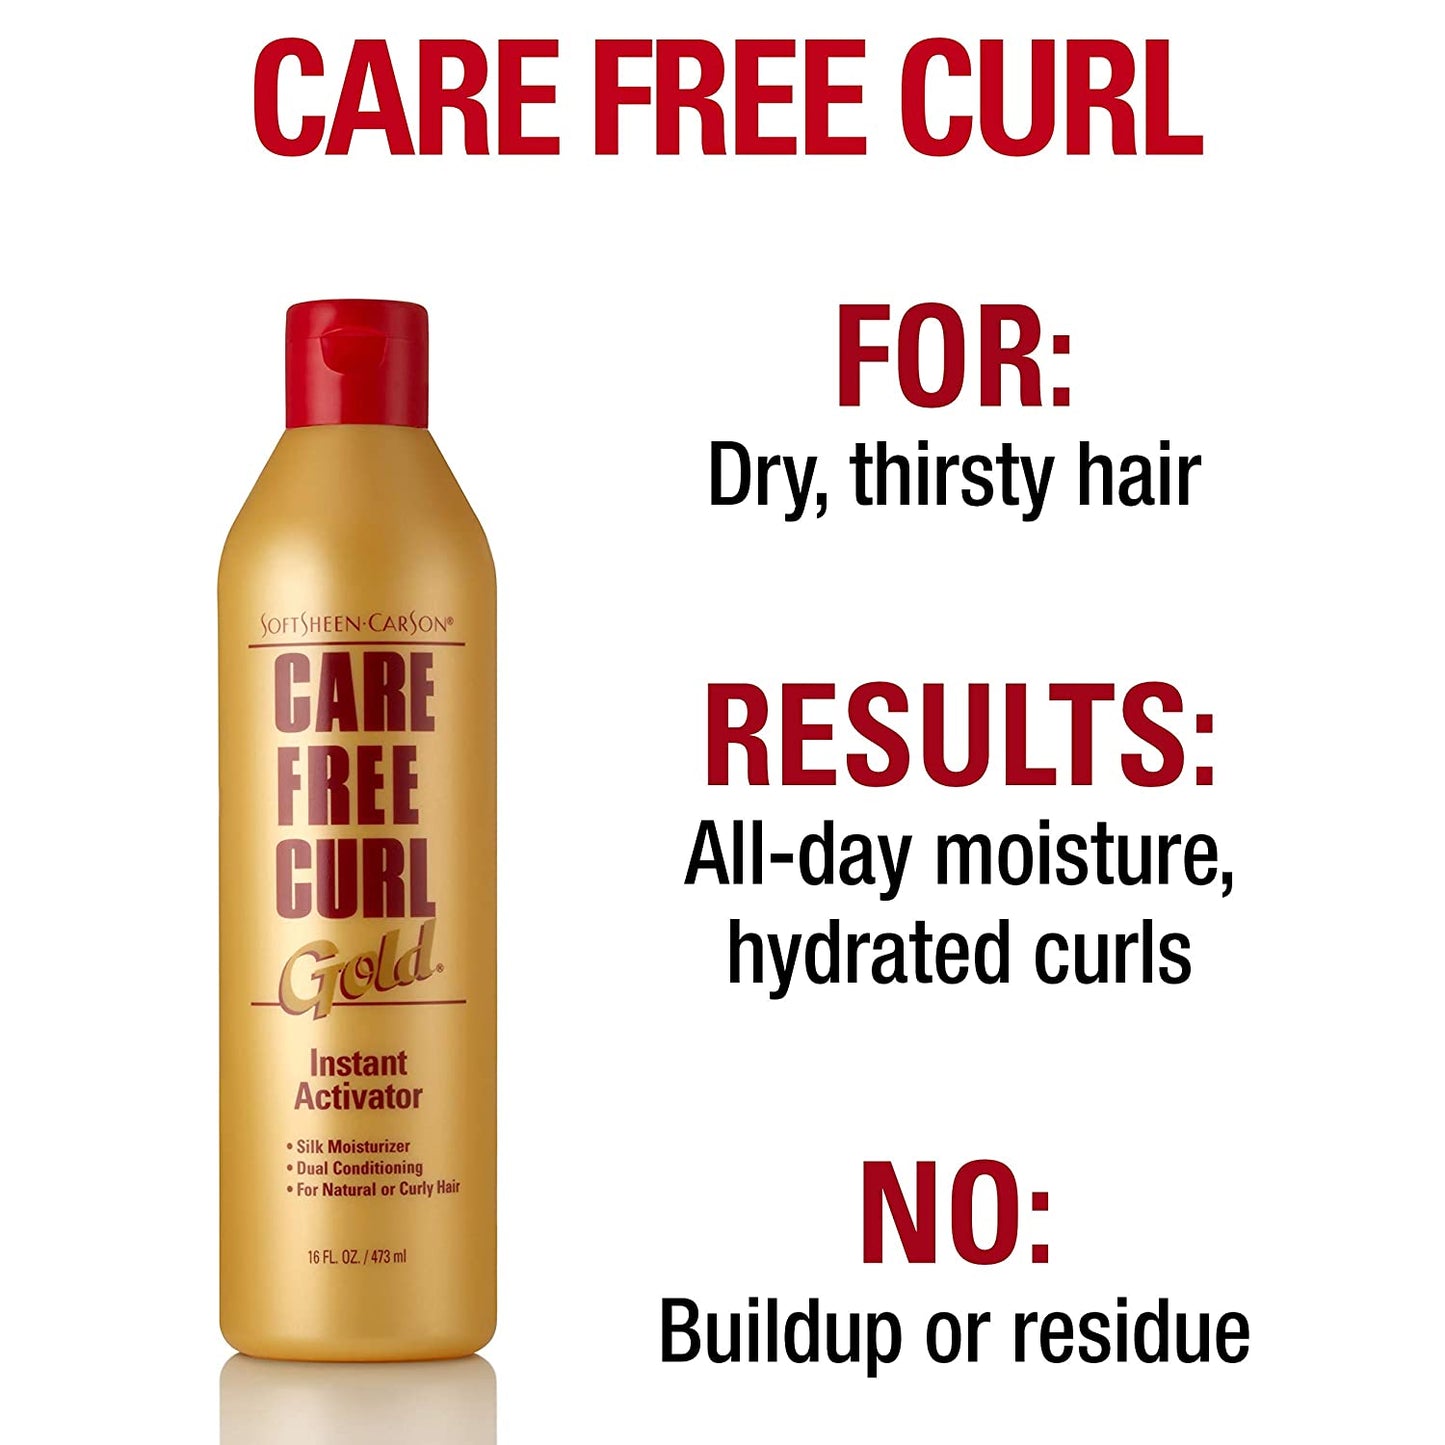 SoftSheen Carson Care Free Curl Gold Instant Activator 8 OZ